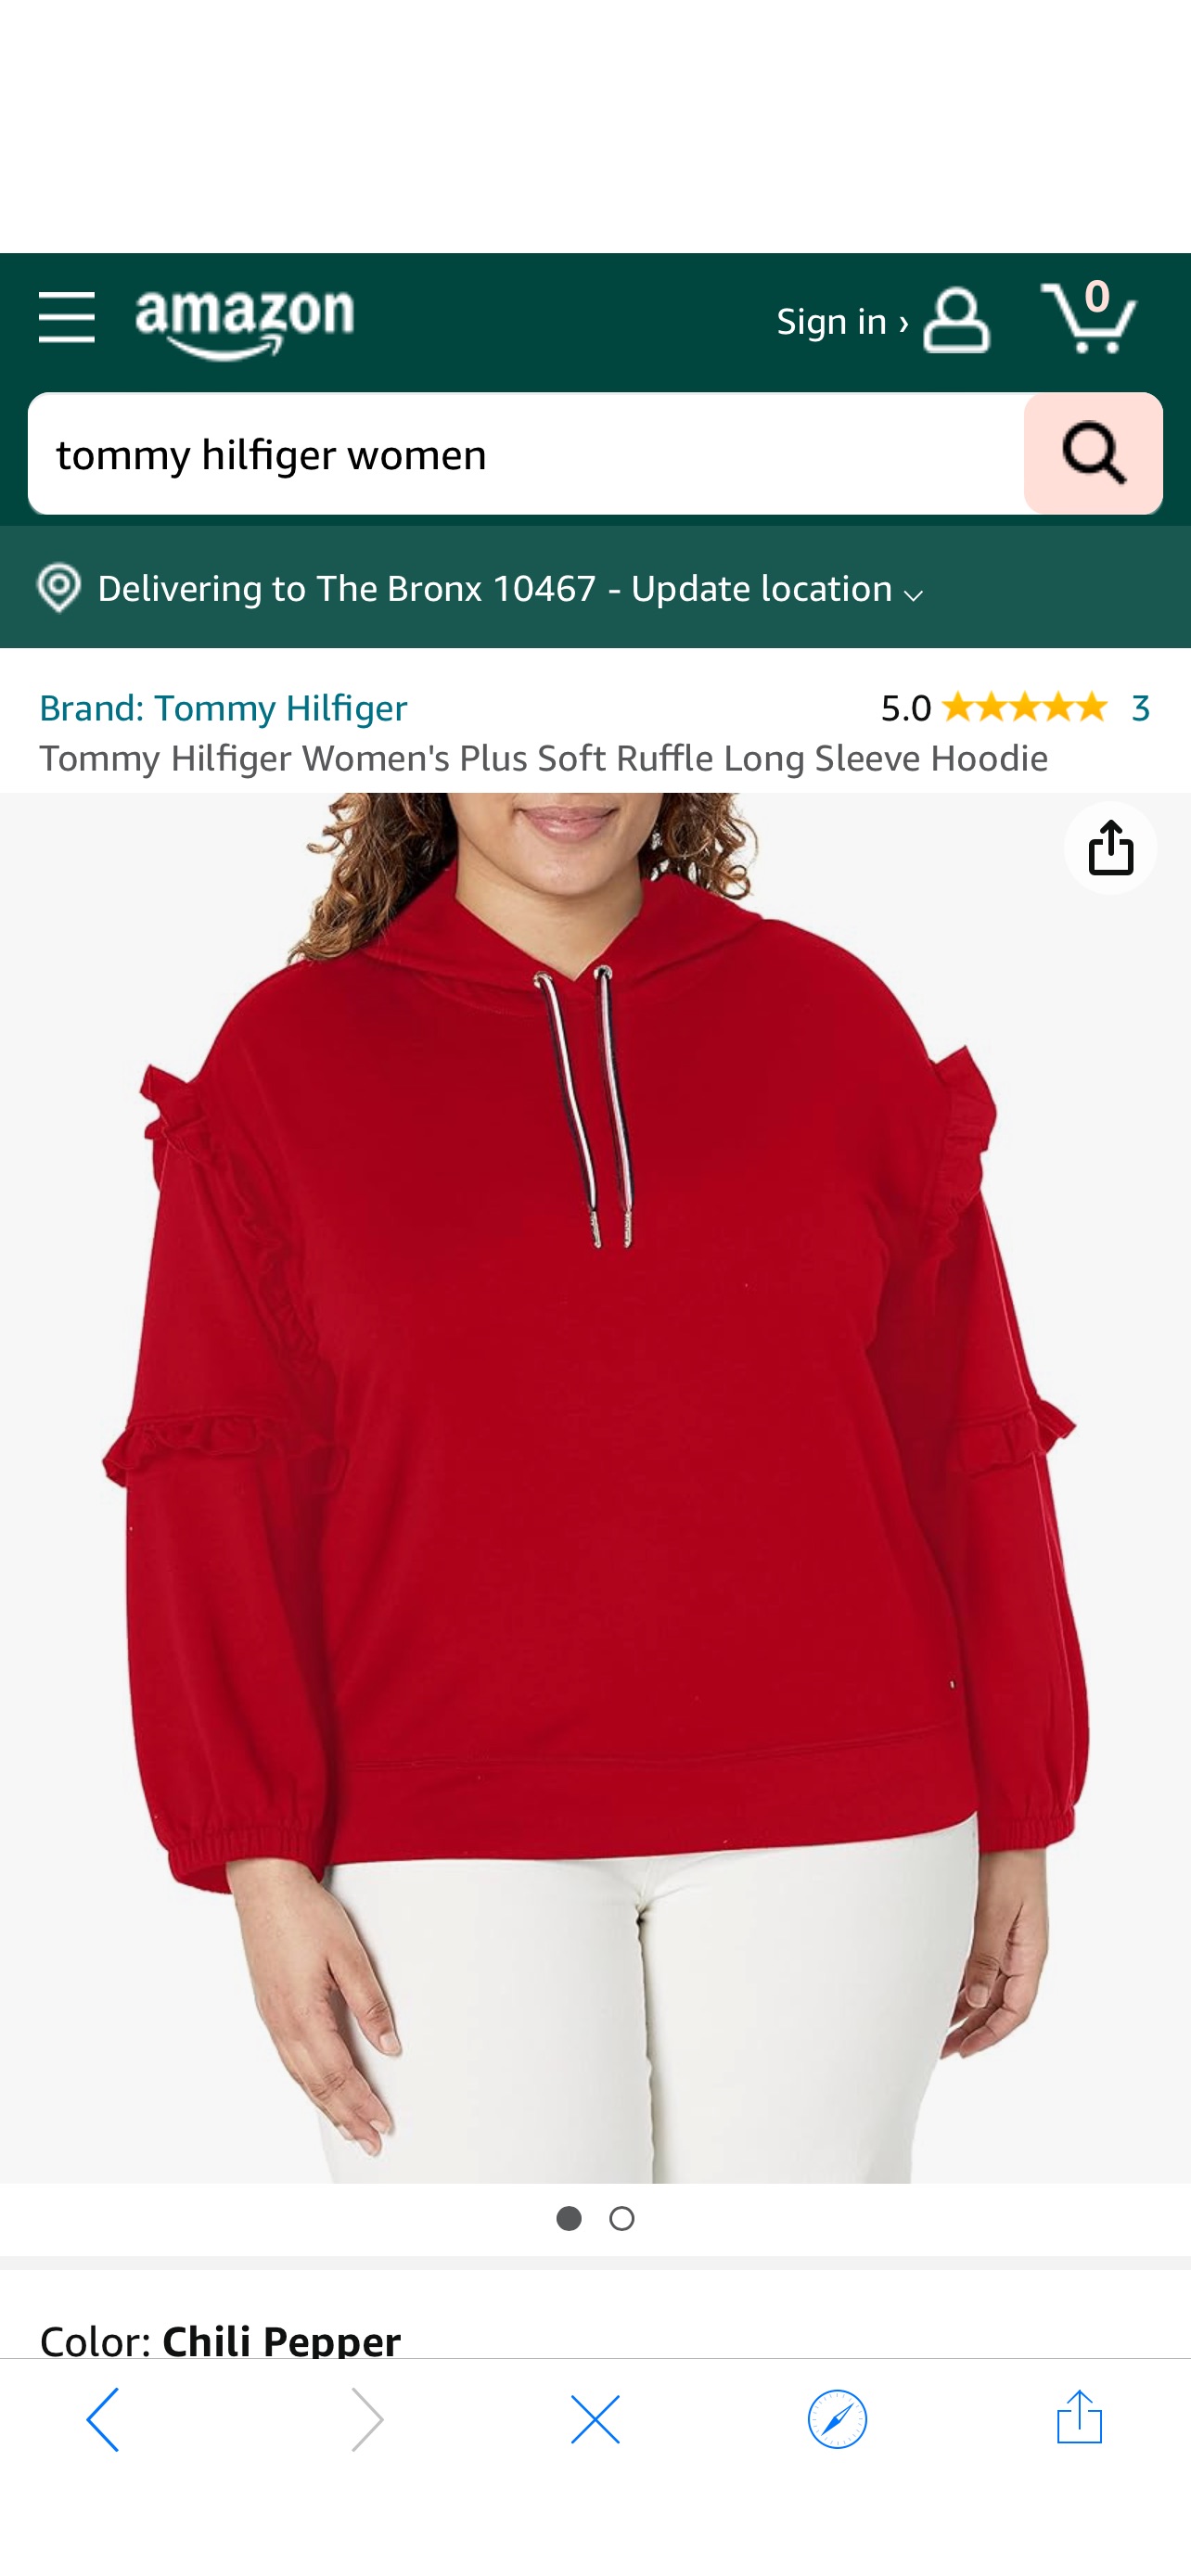 Tommy Hilfiger Women's Plus Soft Ruffle Long Sleeve Hoodie, Chili Pepper at Amazon Women’s Clothing store